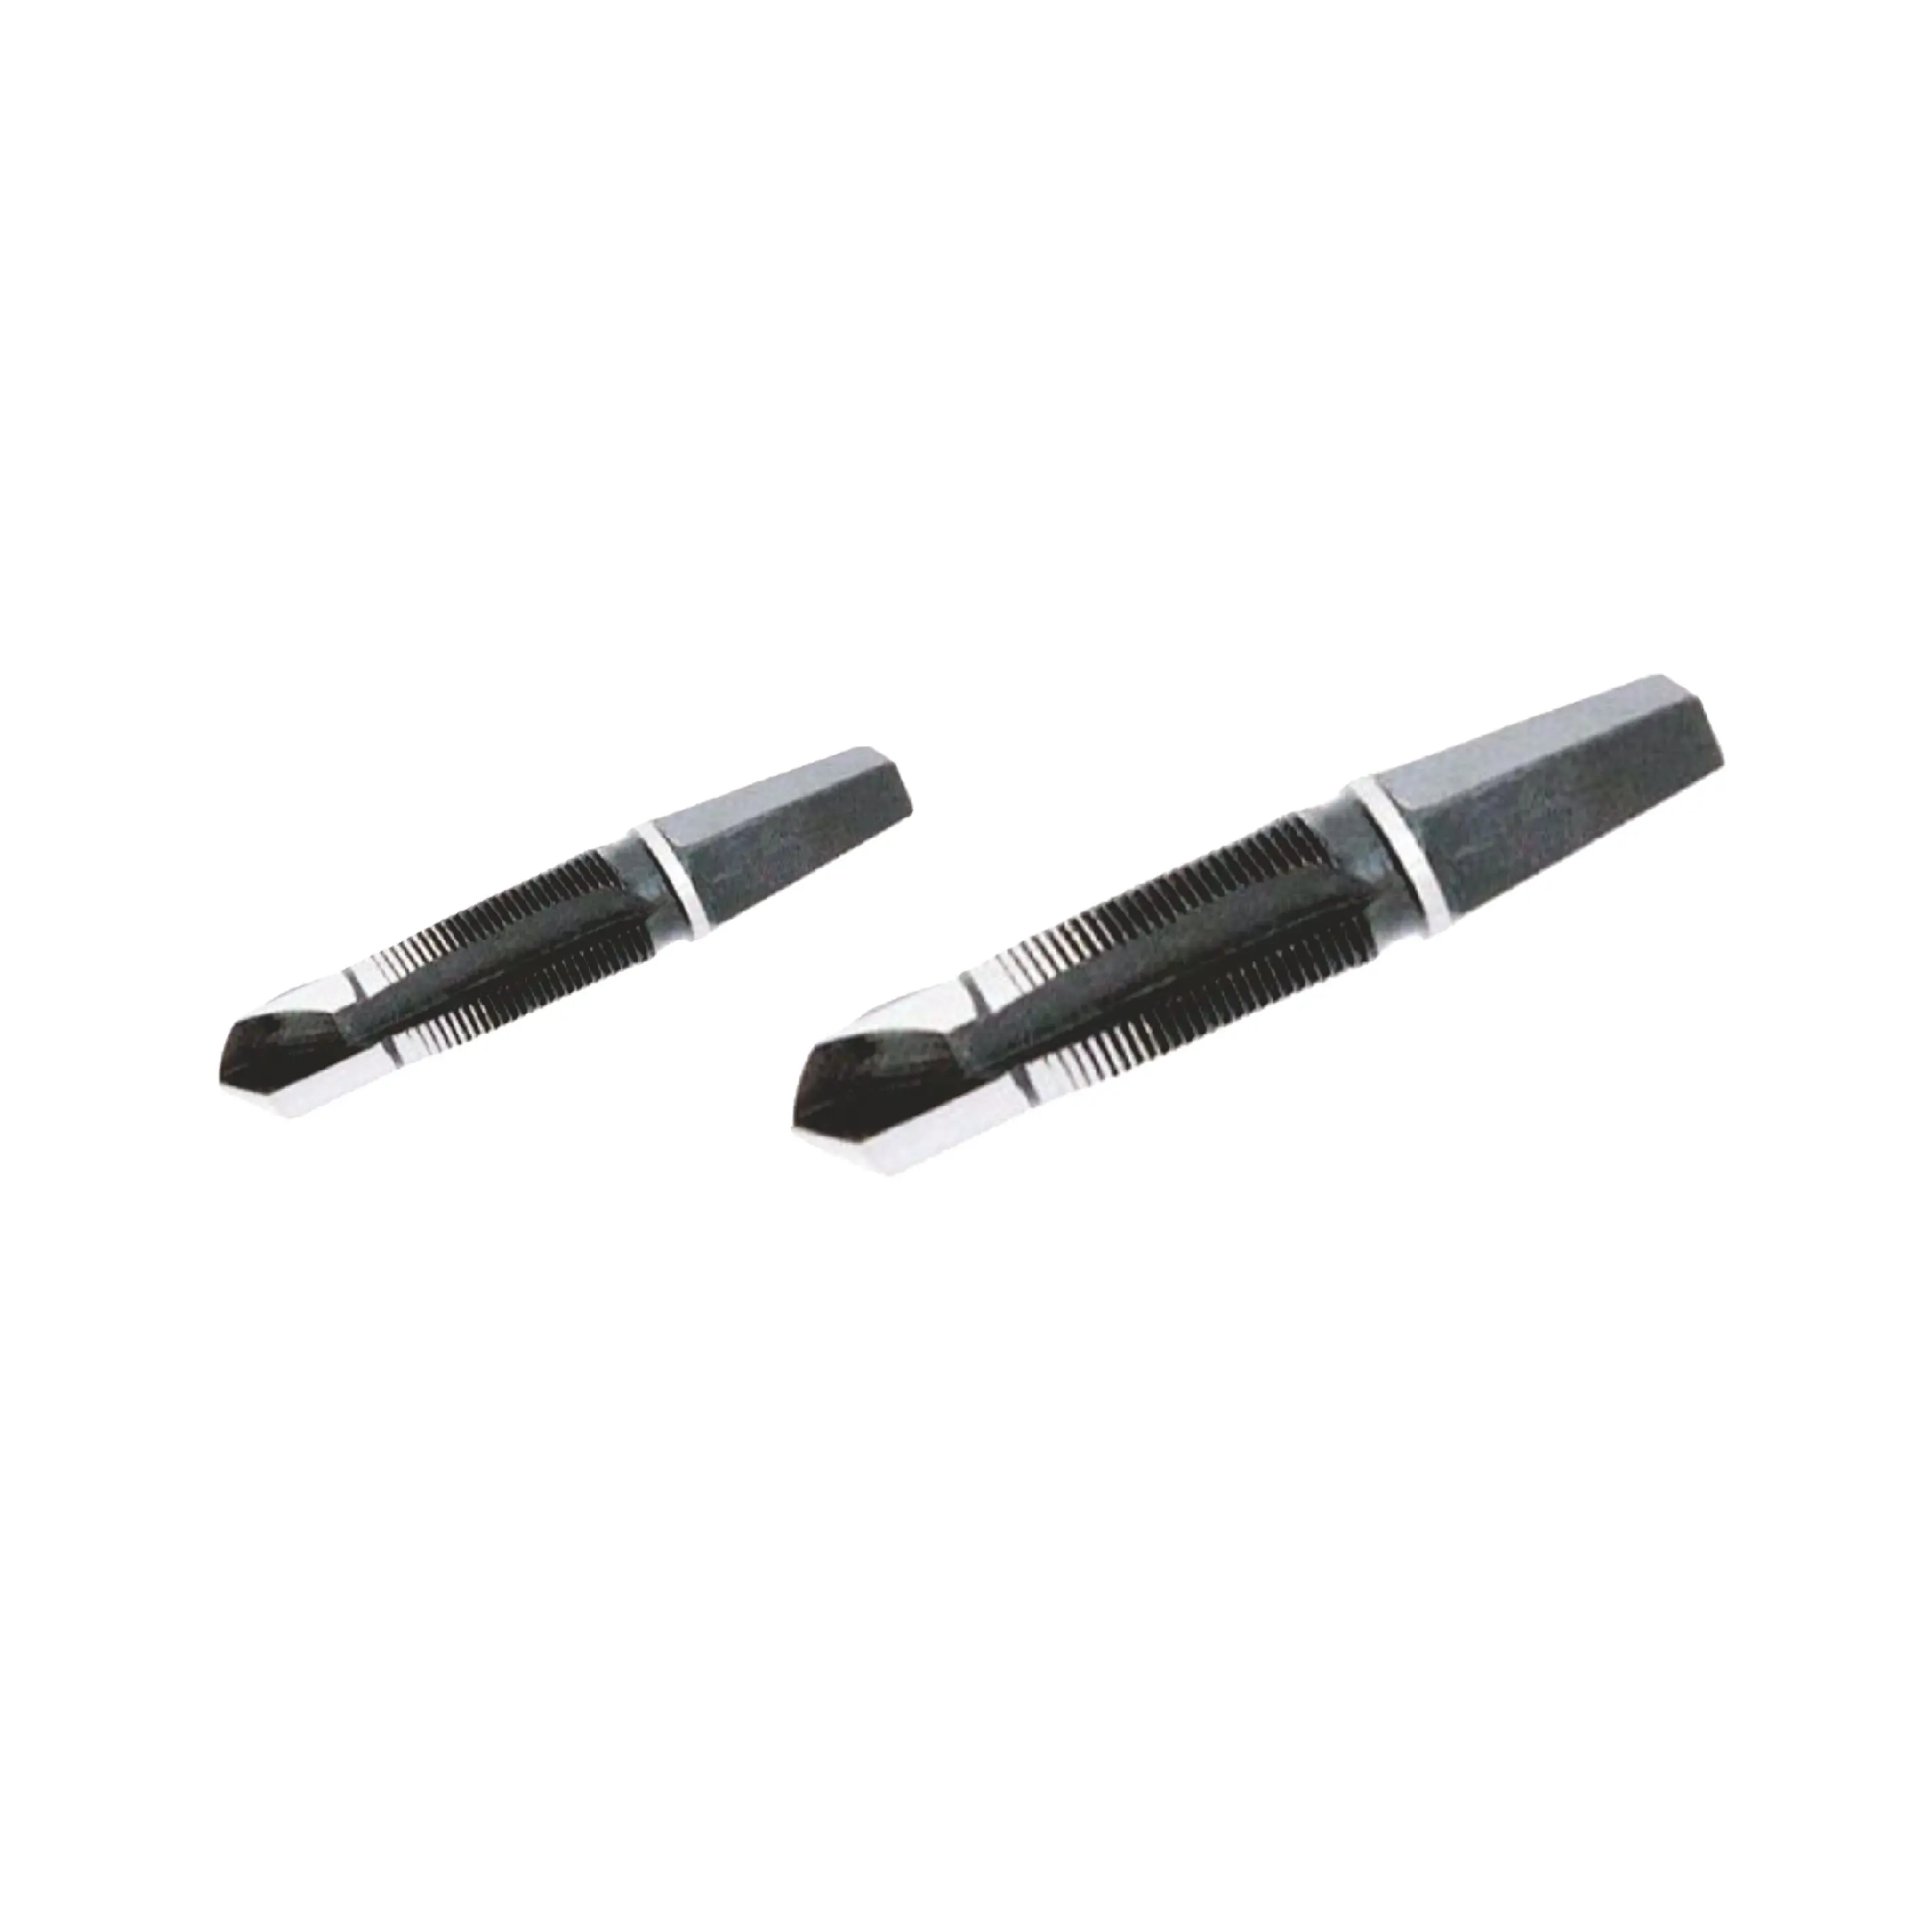 High selling 1/2' Tap drill combined speed steel material cut and hole tap drill combined hand tools